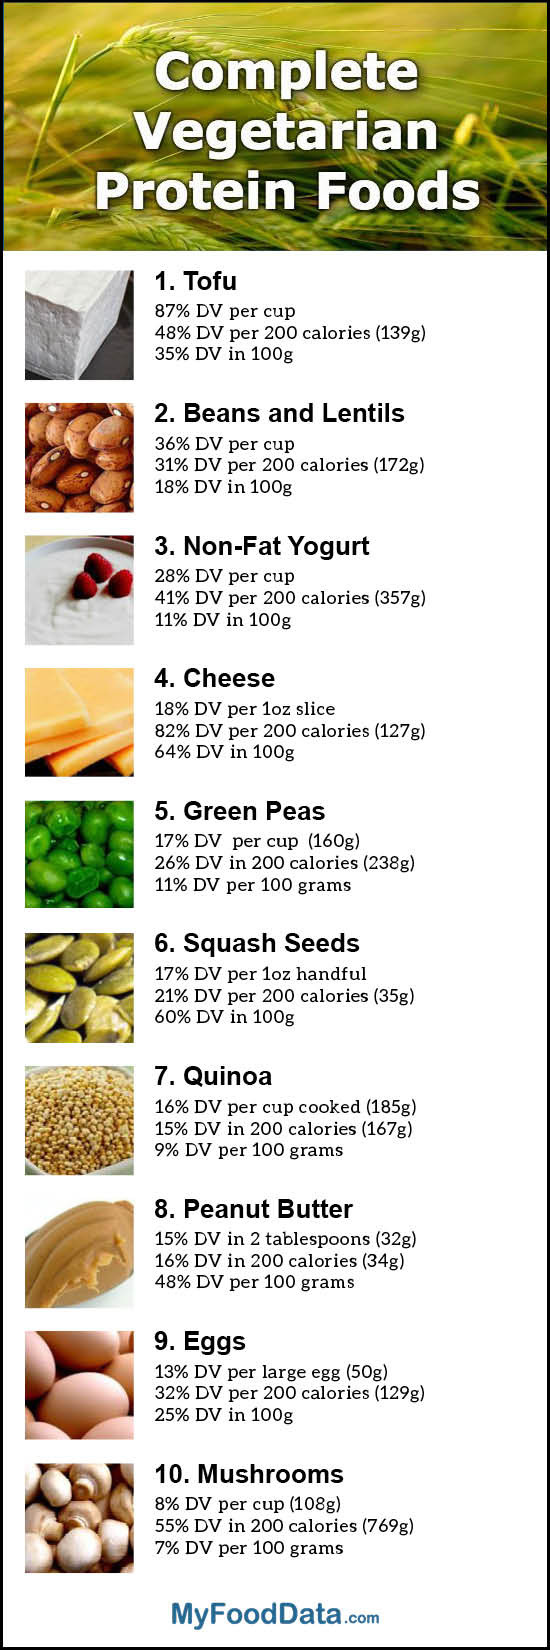 Protein Options For Vegetarian
 Top 10 plete Ve arian Protein Foods with All the